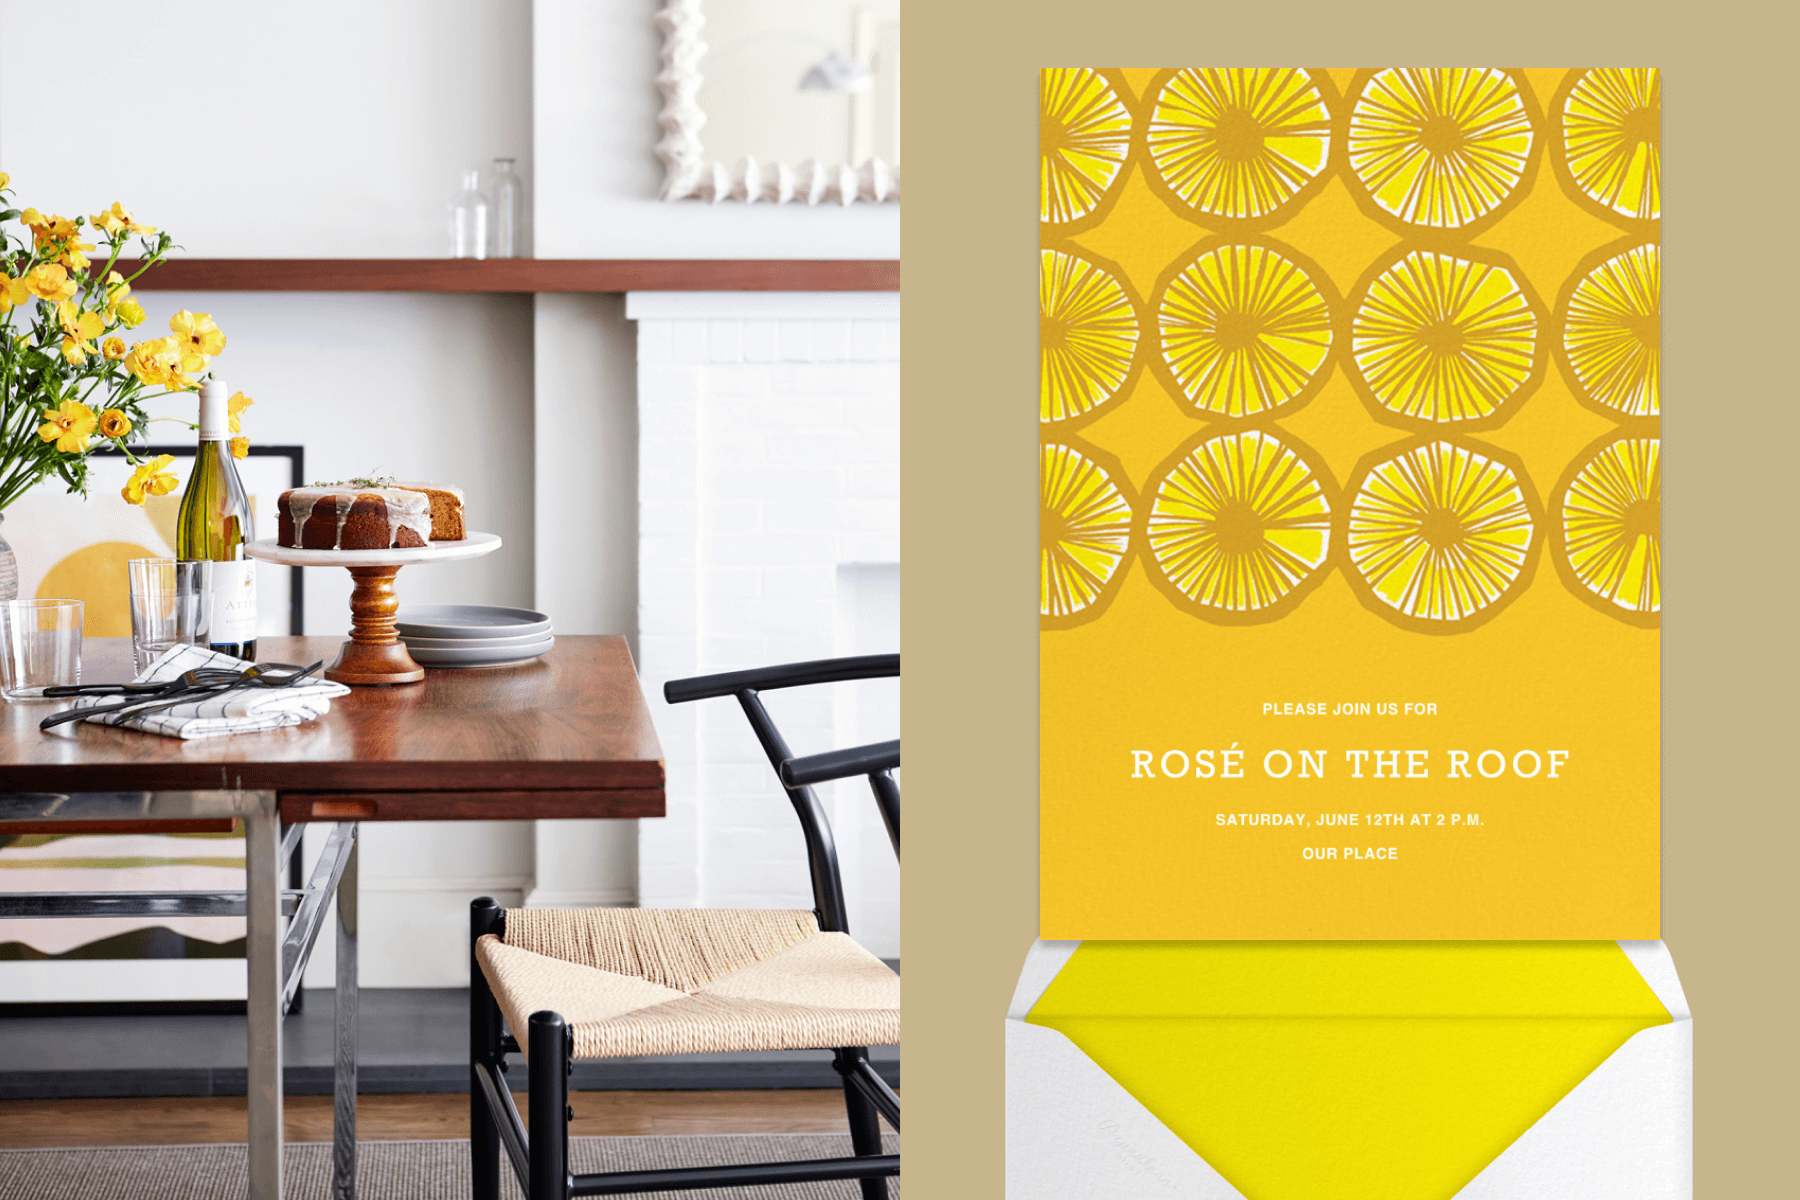 Left: A table set with wine and a bundt cake; Right: An invitation featuring illustrations of lemons.